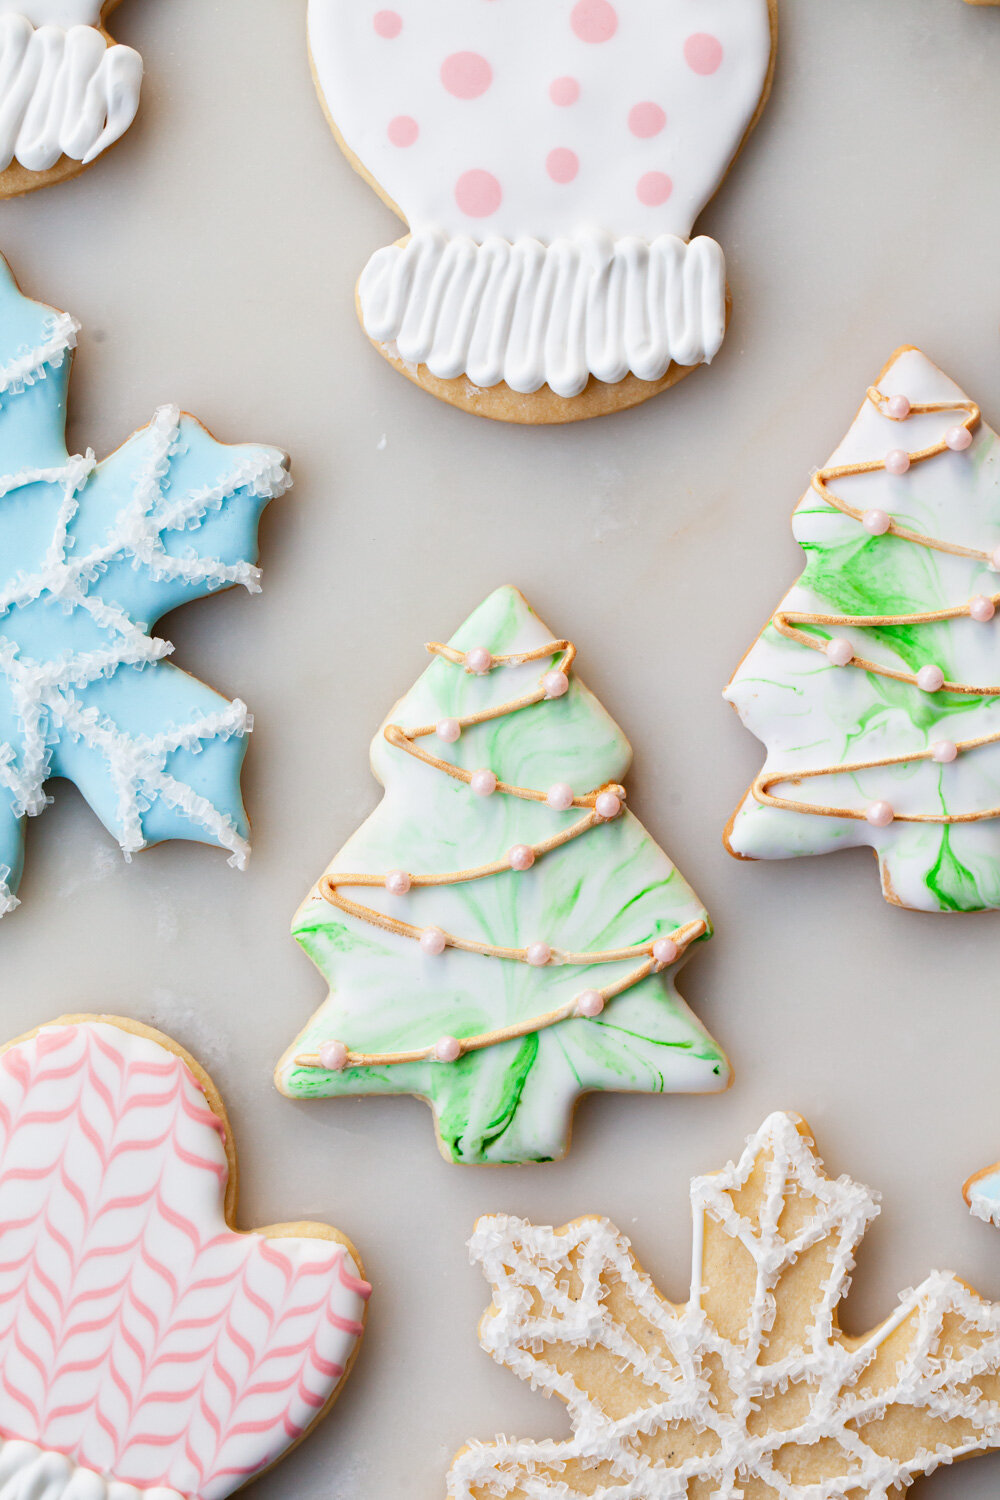 How to Decorate Christmas Cookies